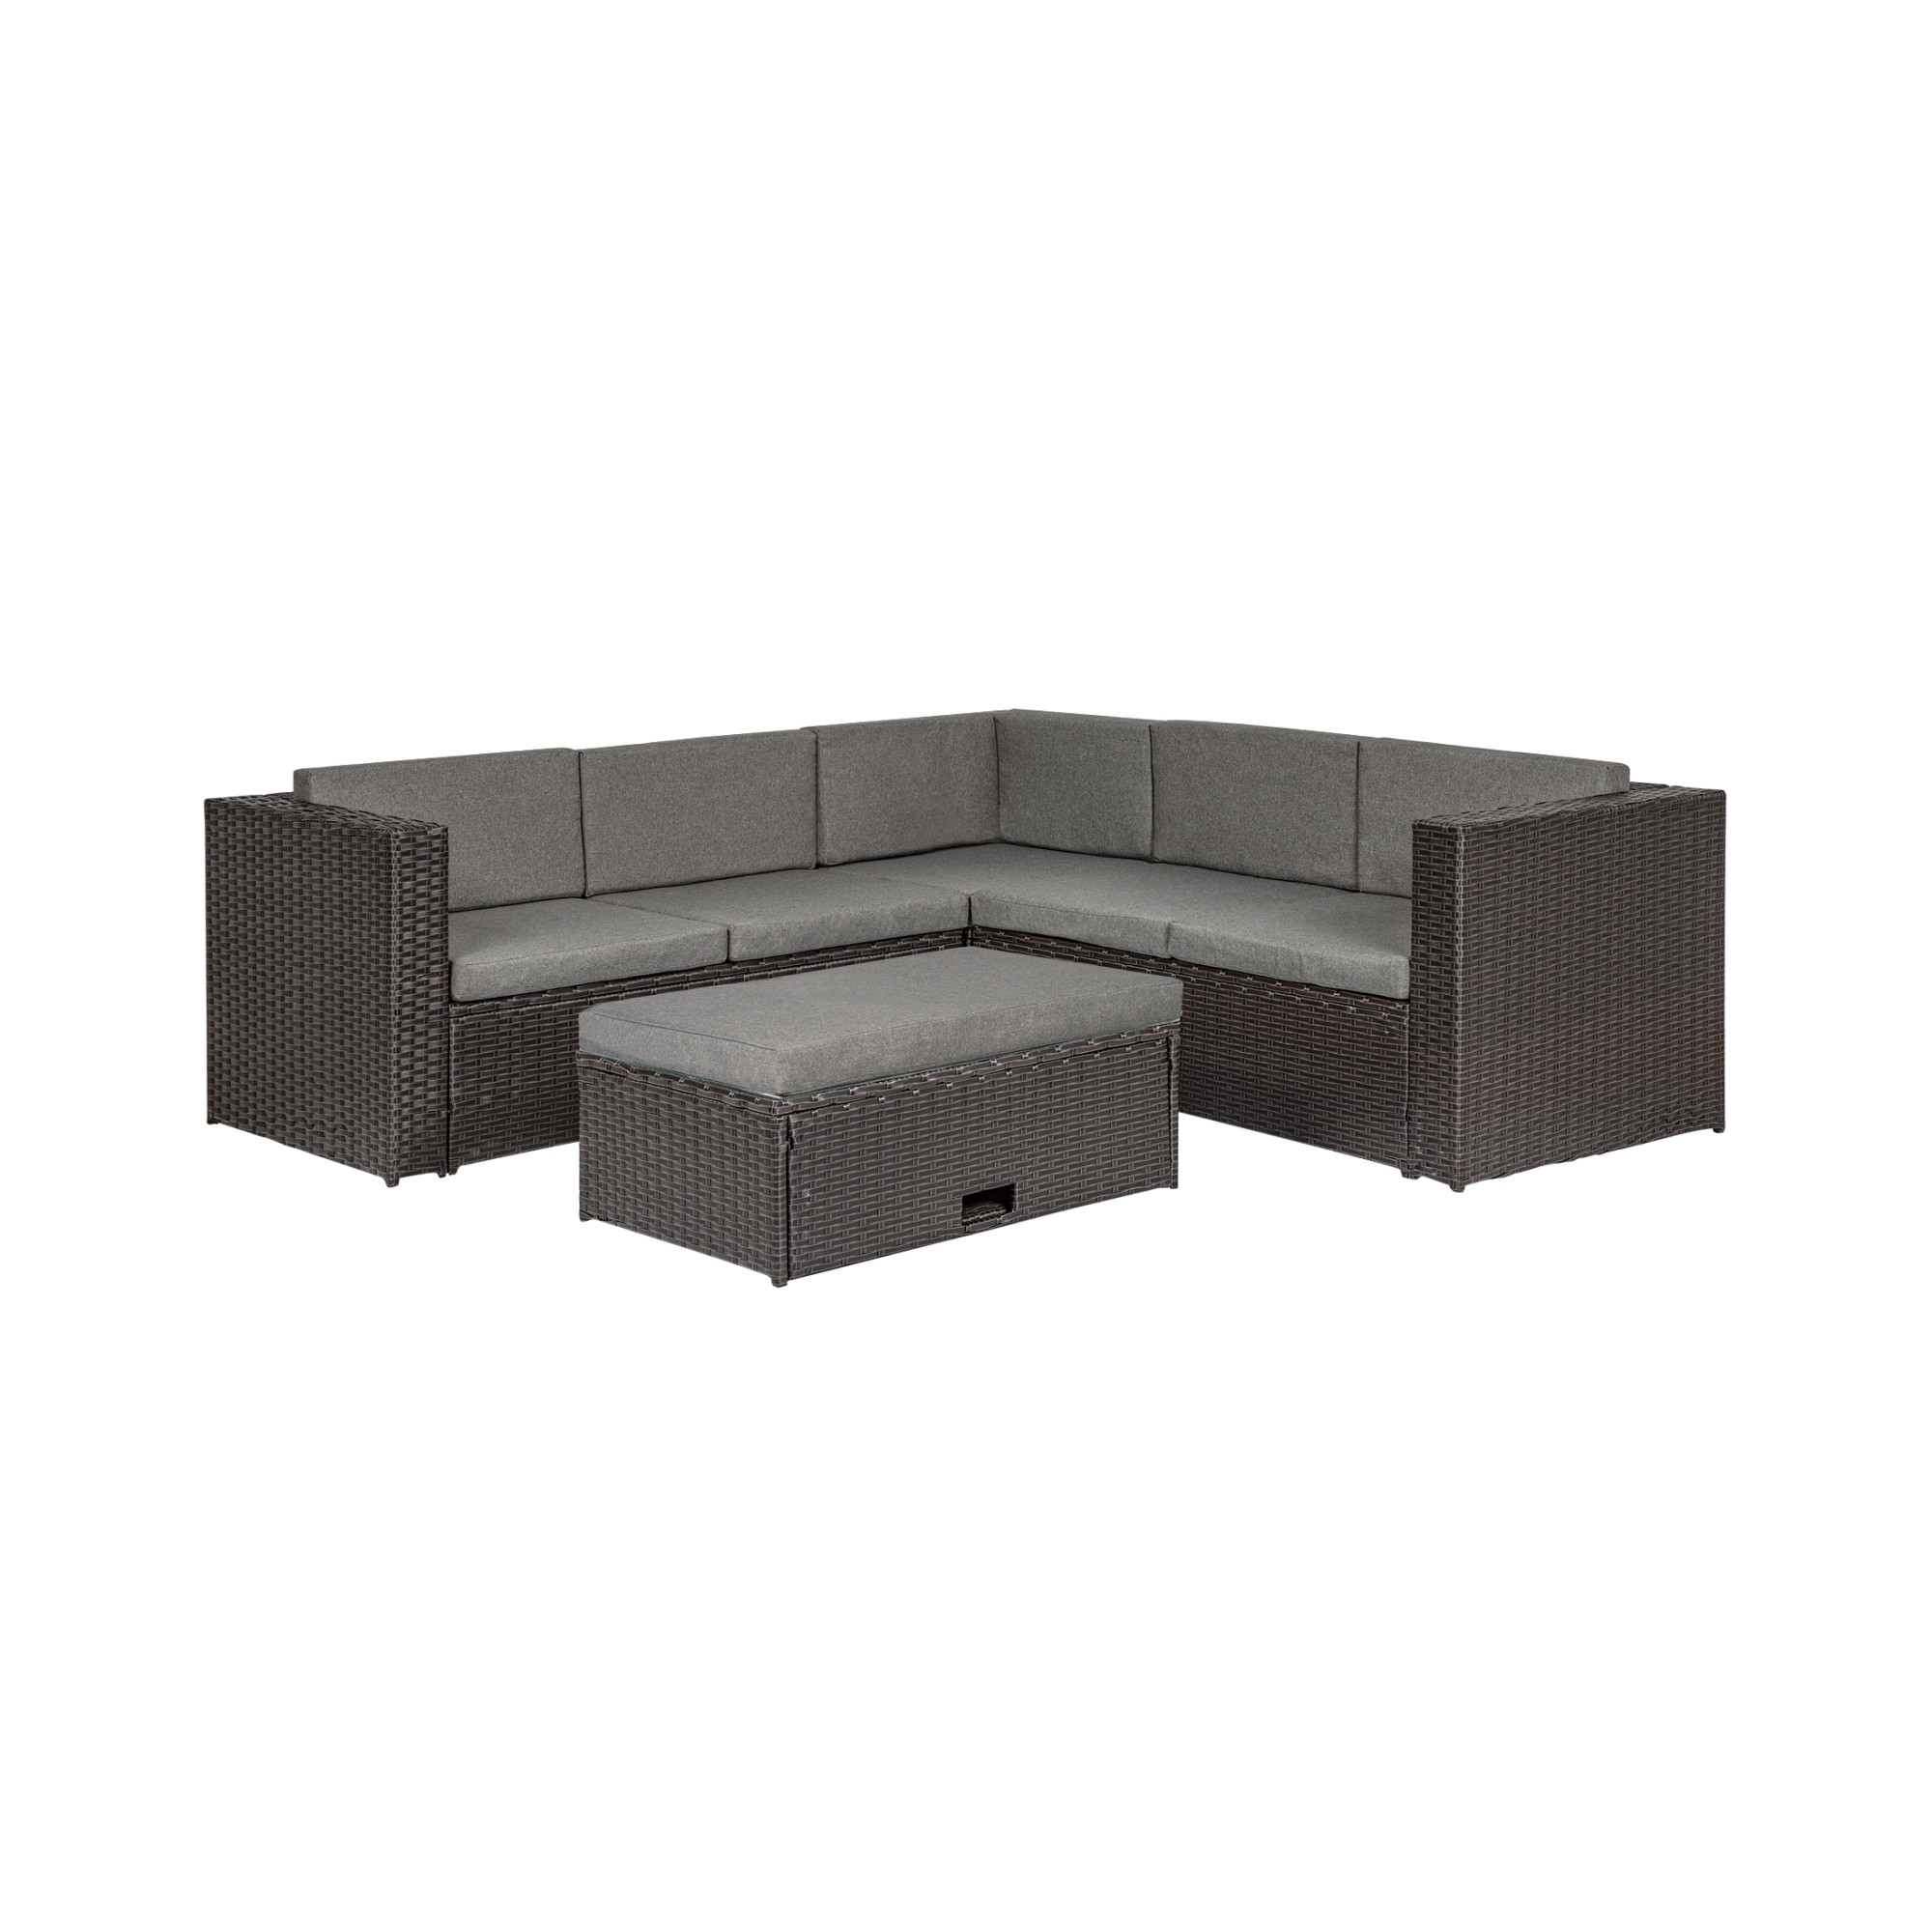 6 Seater Outdoor Patio Modern Sectional Set with Storage Ottoman, Brown/Gray - image 1 of 28